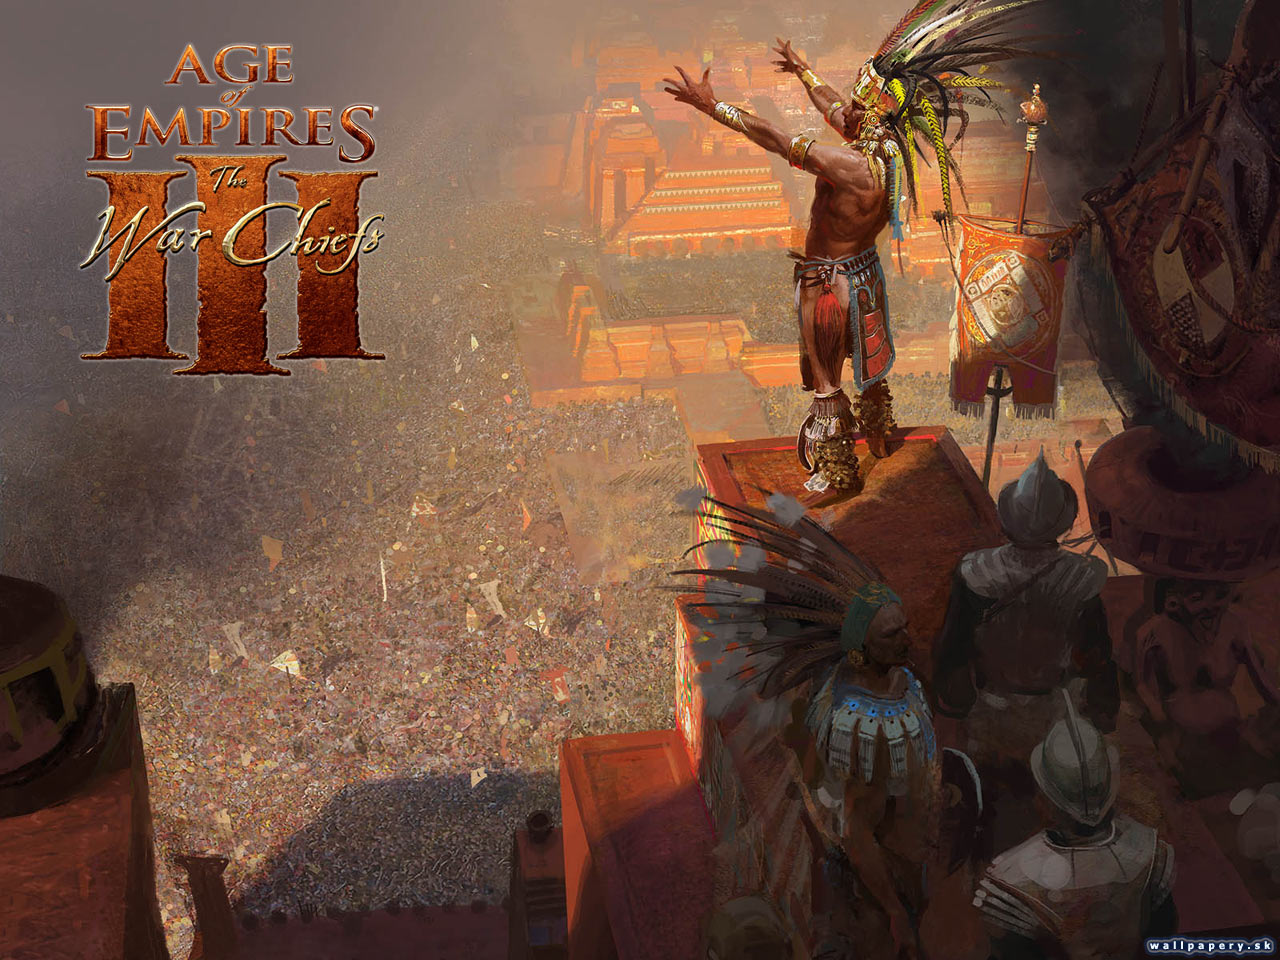 Age of Empires 3: The War Chiefs - wallpaper 8